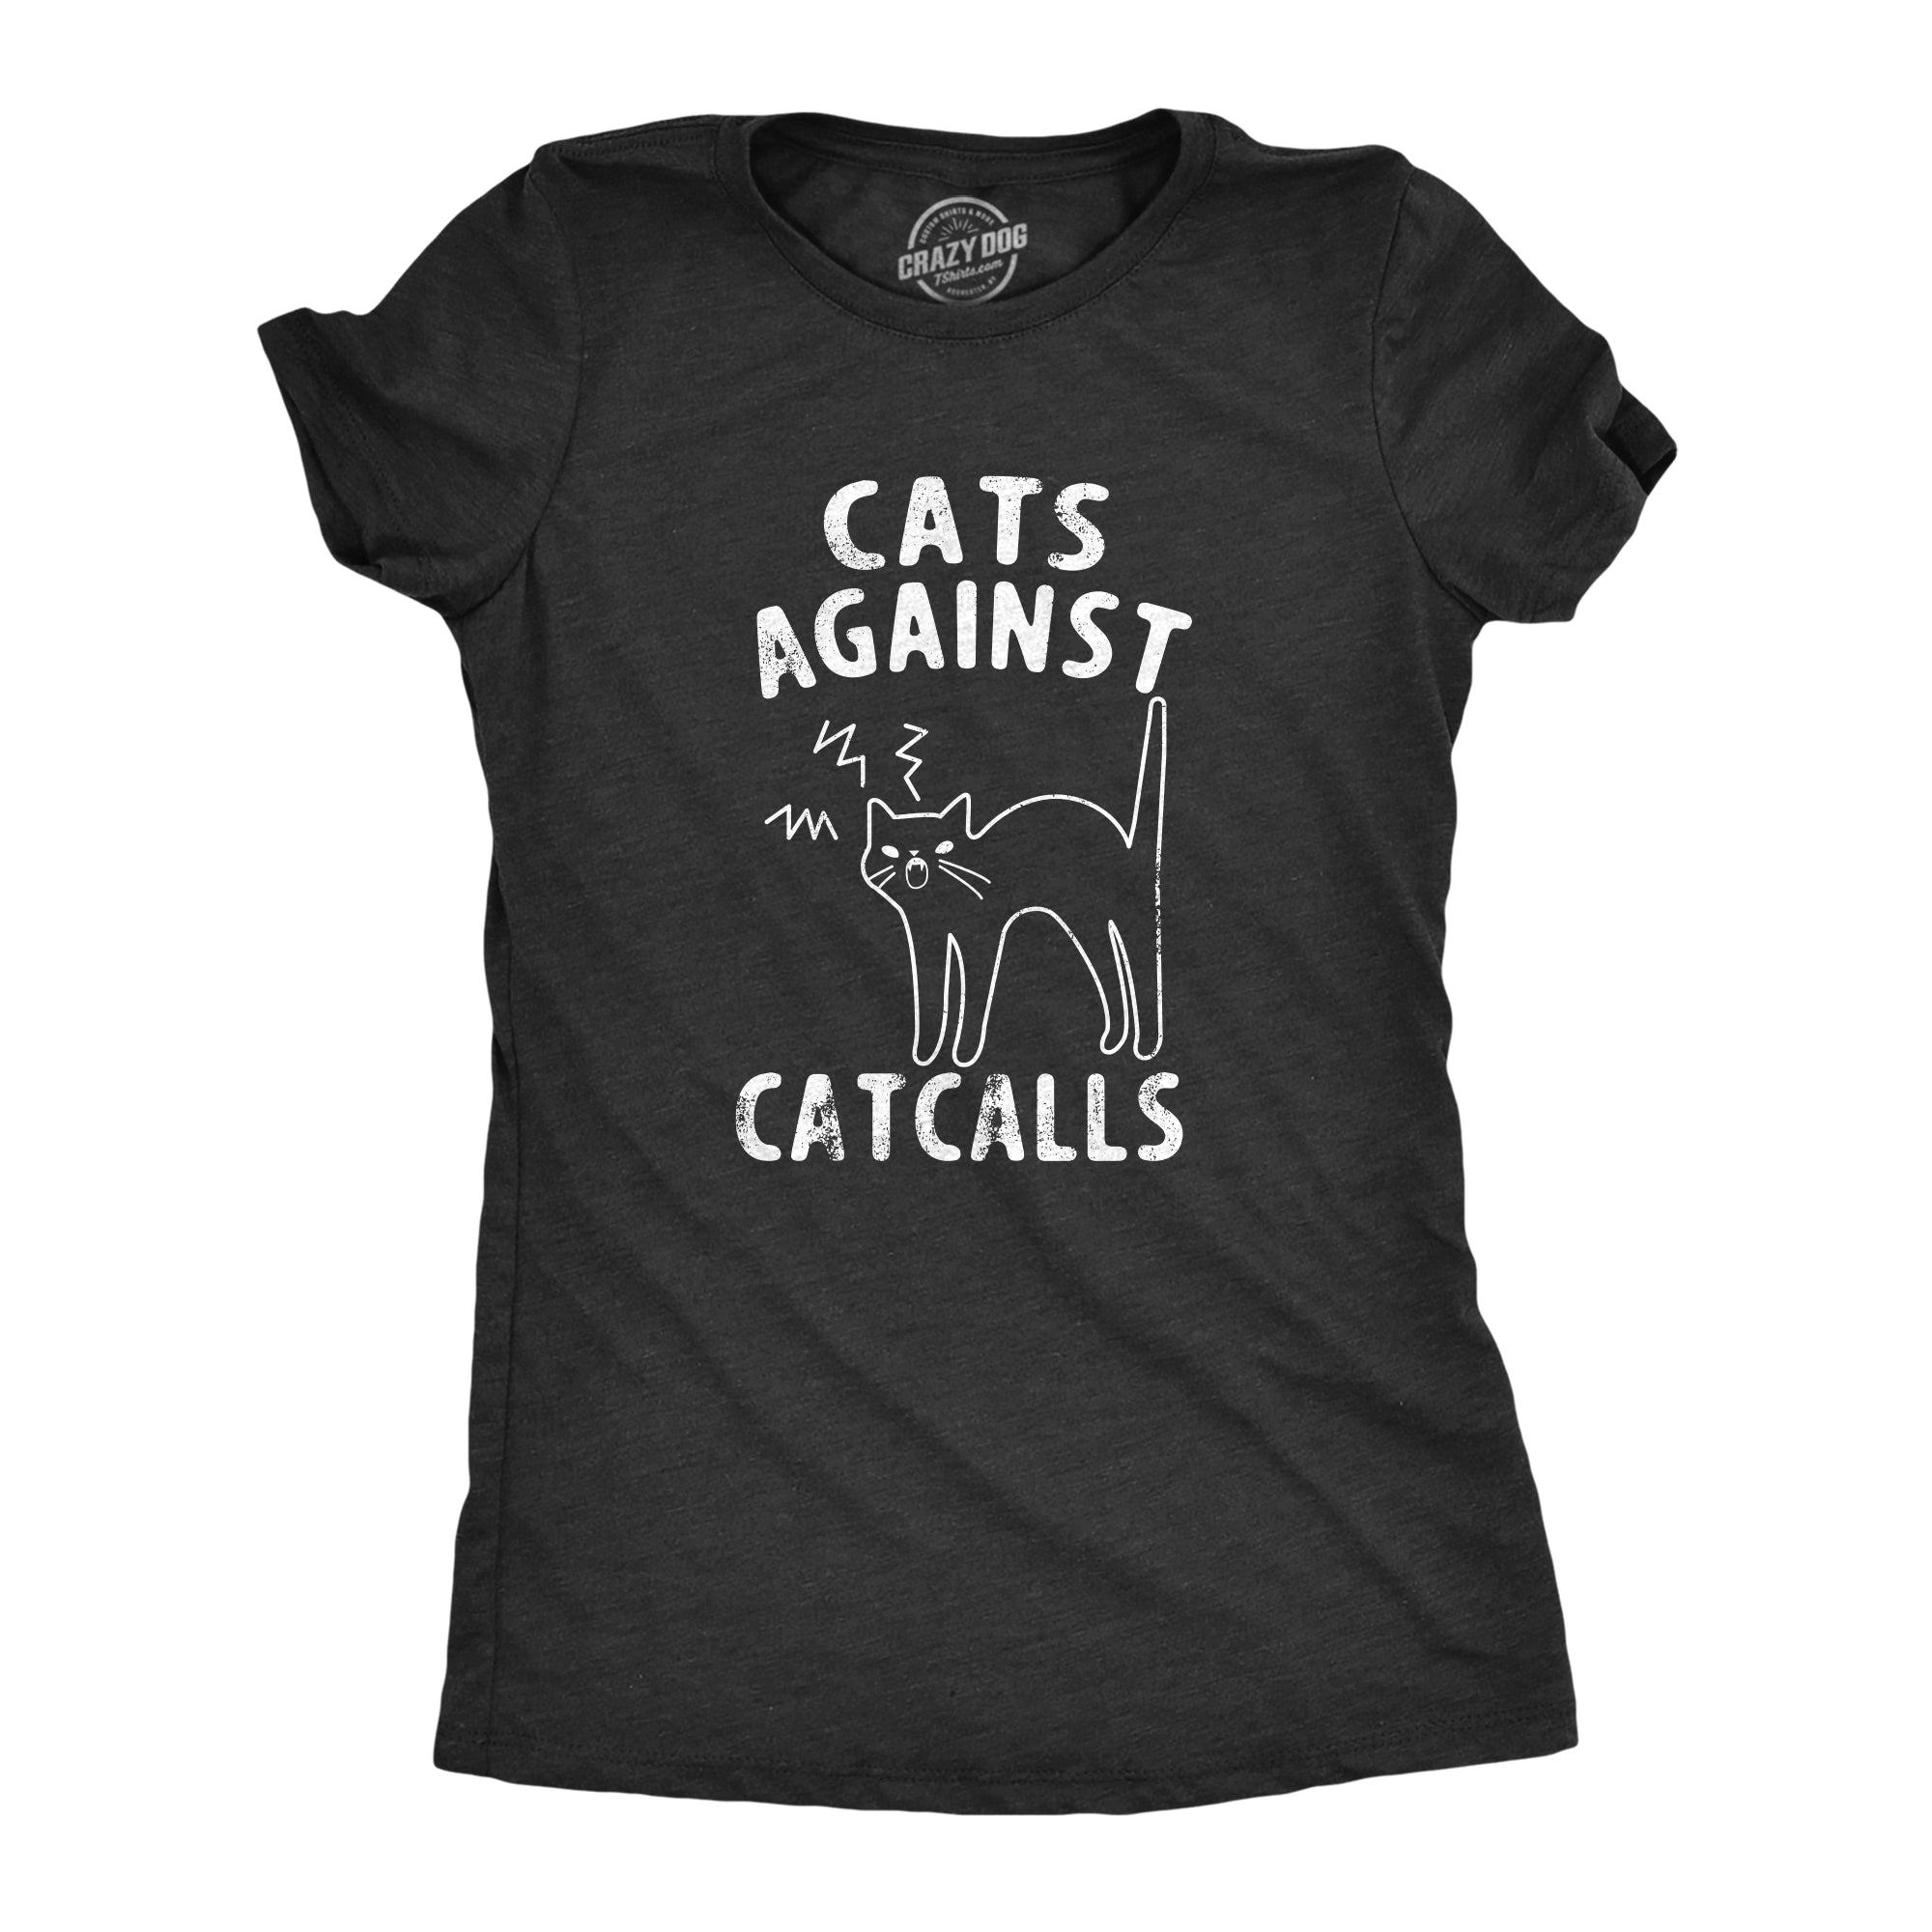 Funny Heather Black - CATCALLS Cats Against Catcalls Womens T Shirt Nerdy Sarcastic Tee